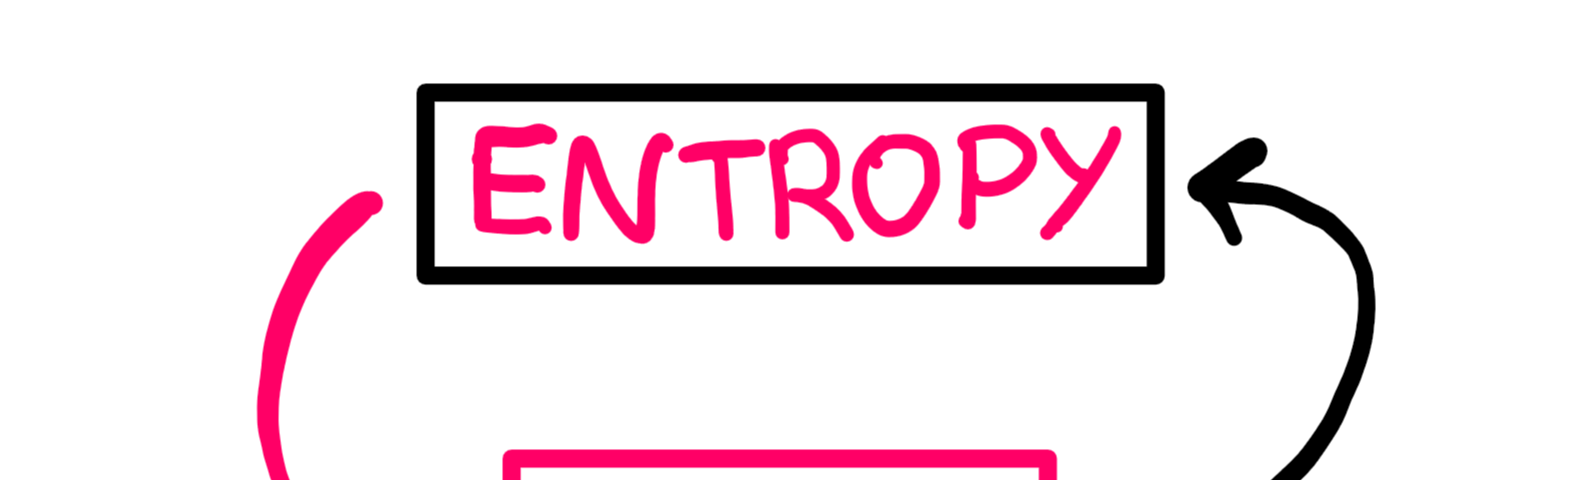 The words life and entropy pointed at each other in a circular fashion. The word entropy is in pink inside a black box, whereas the word life is in black with inside a pink box. While entropy points to life with a curved pink arrow, life points to entropy with a curved black arrow.